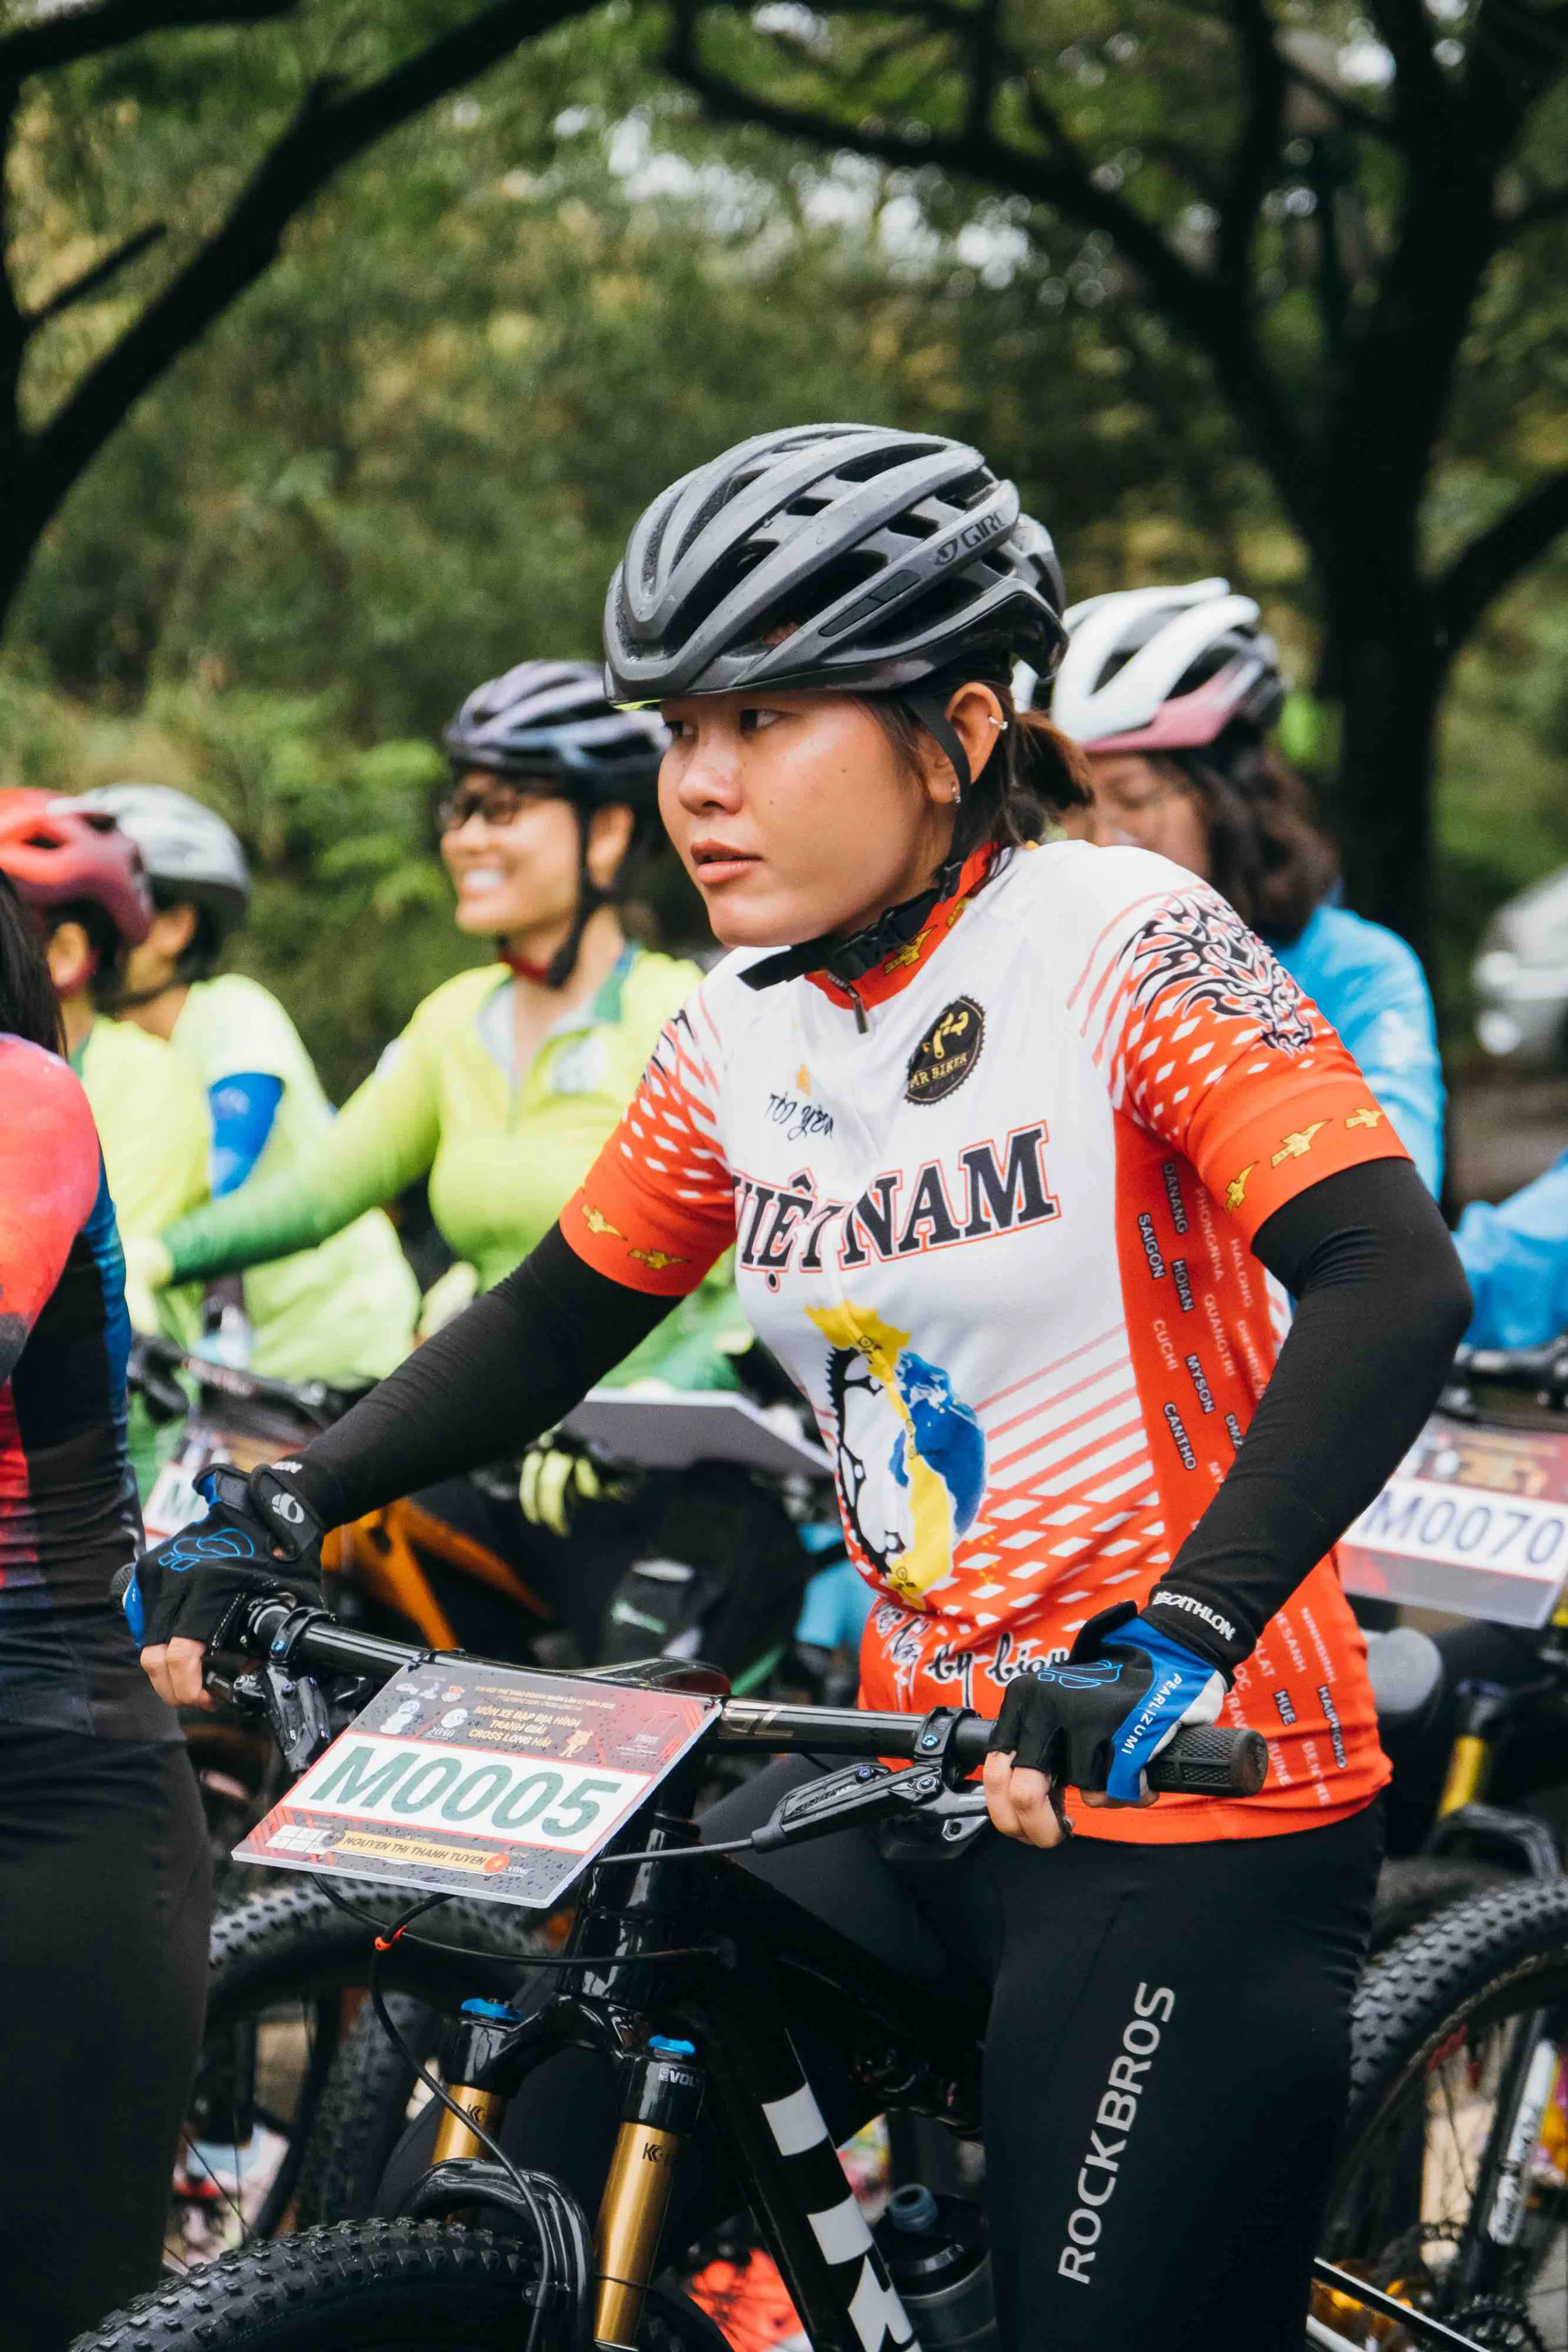 Thanh Tuyen: The cycling enthusiast